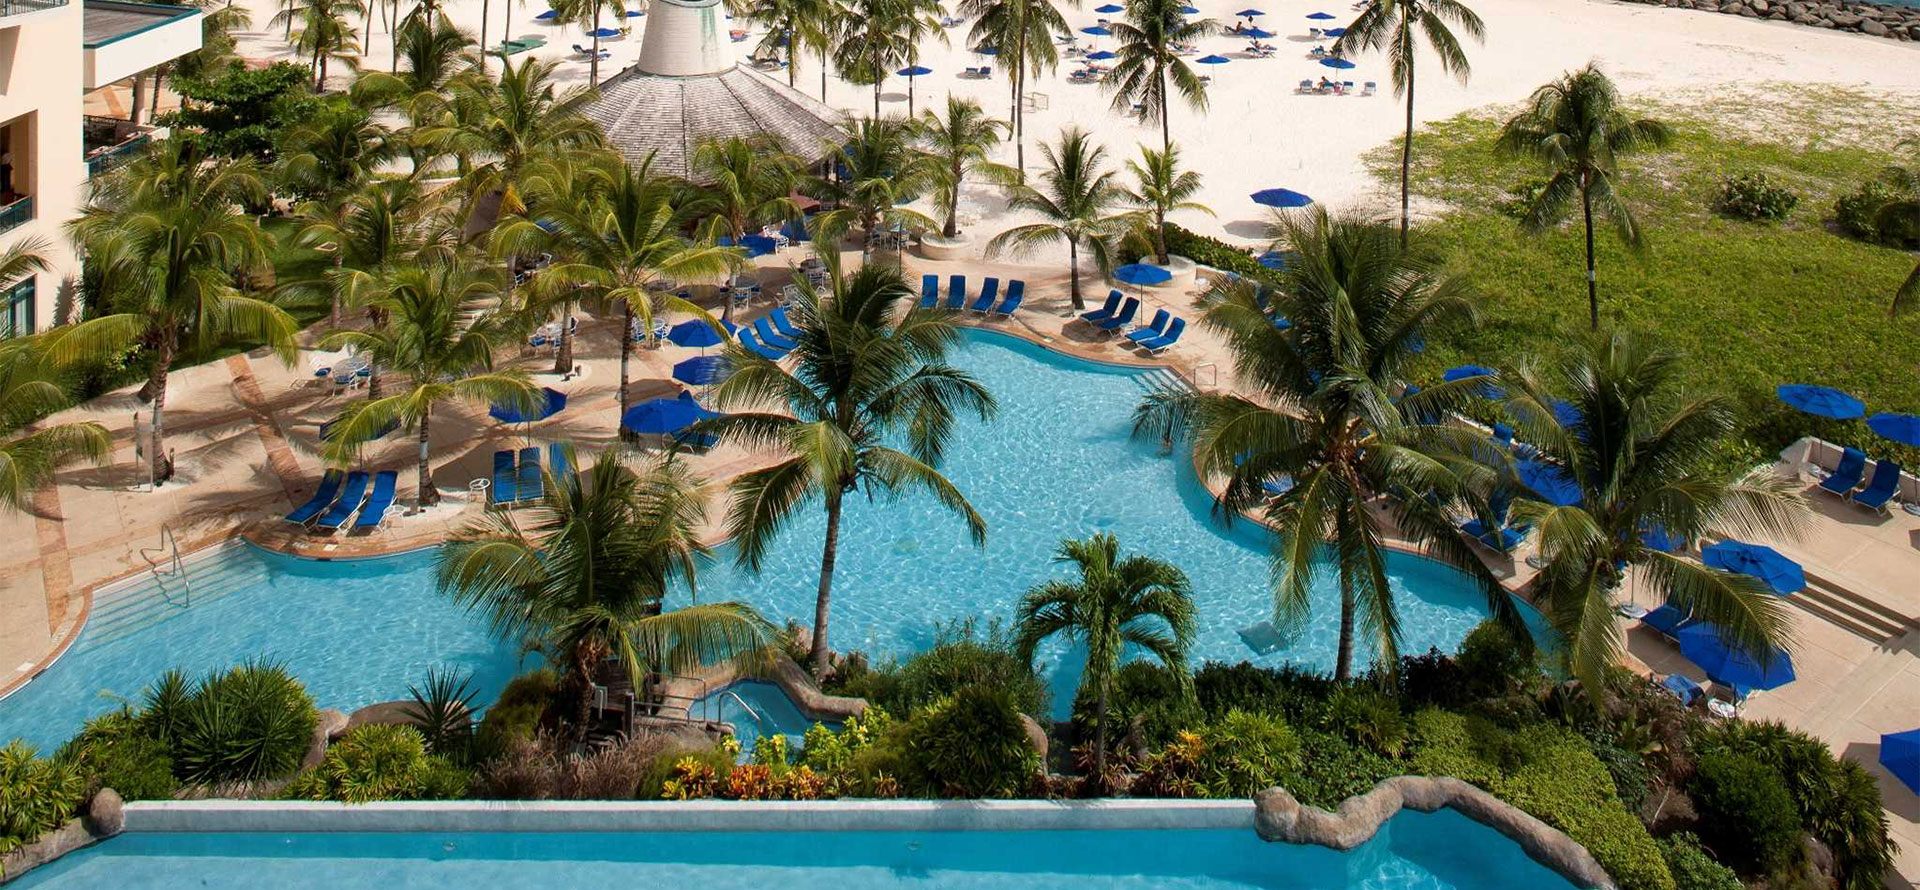 Barbados all-inclusive adults only resort swimming pool.